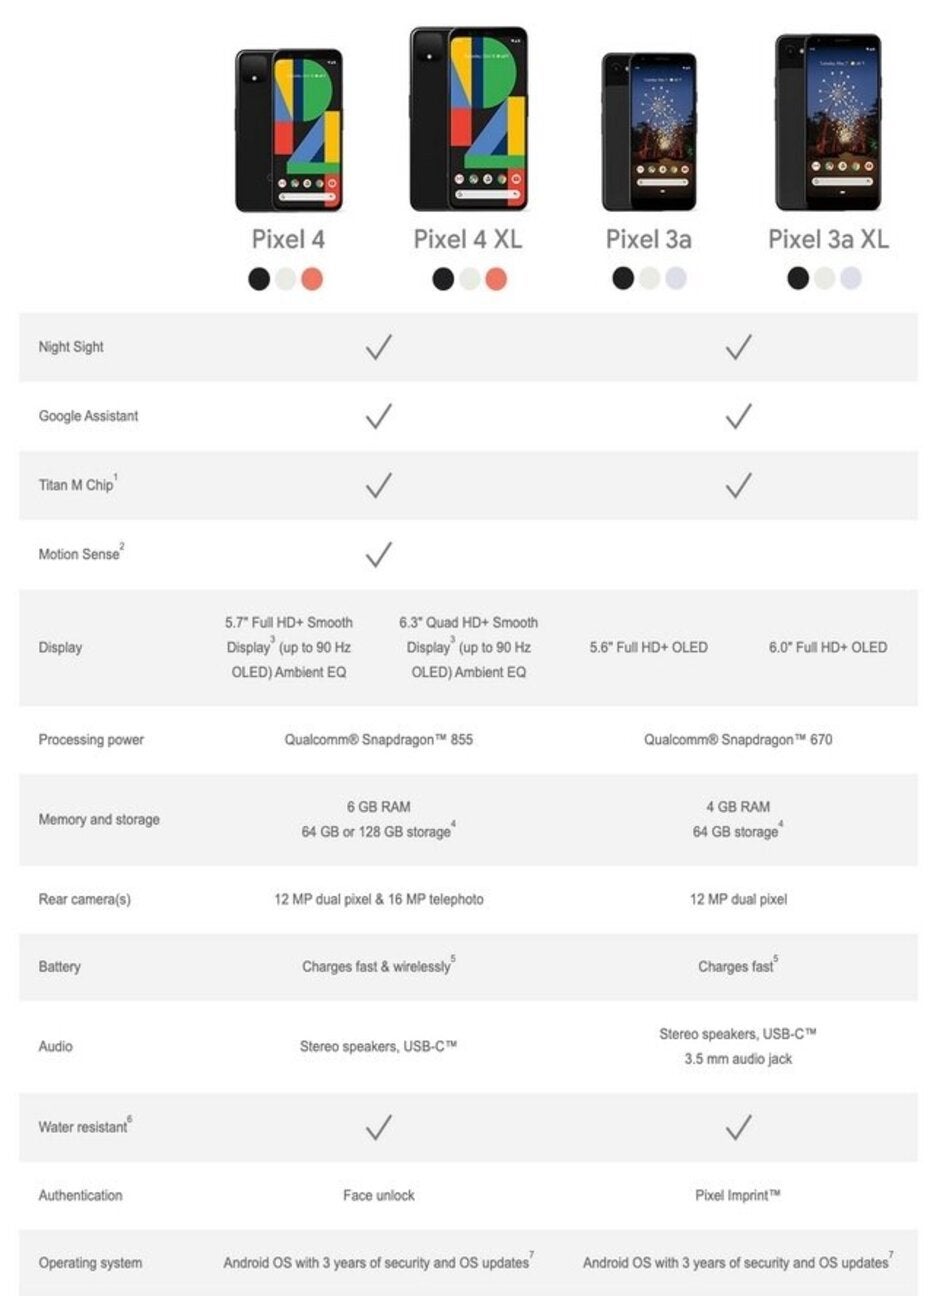 Specs for the Pixel 4 series compared with the mid-range Pixel 3a line - Another retailer accidentally posts its Pixel 4 product page